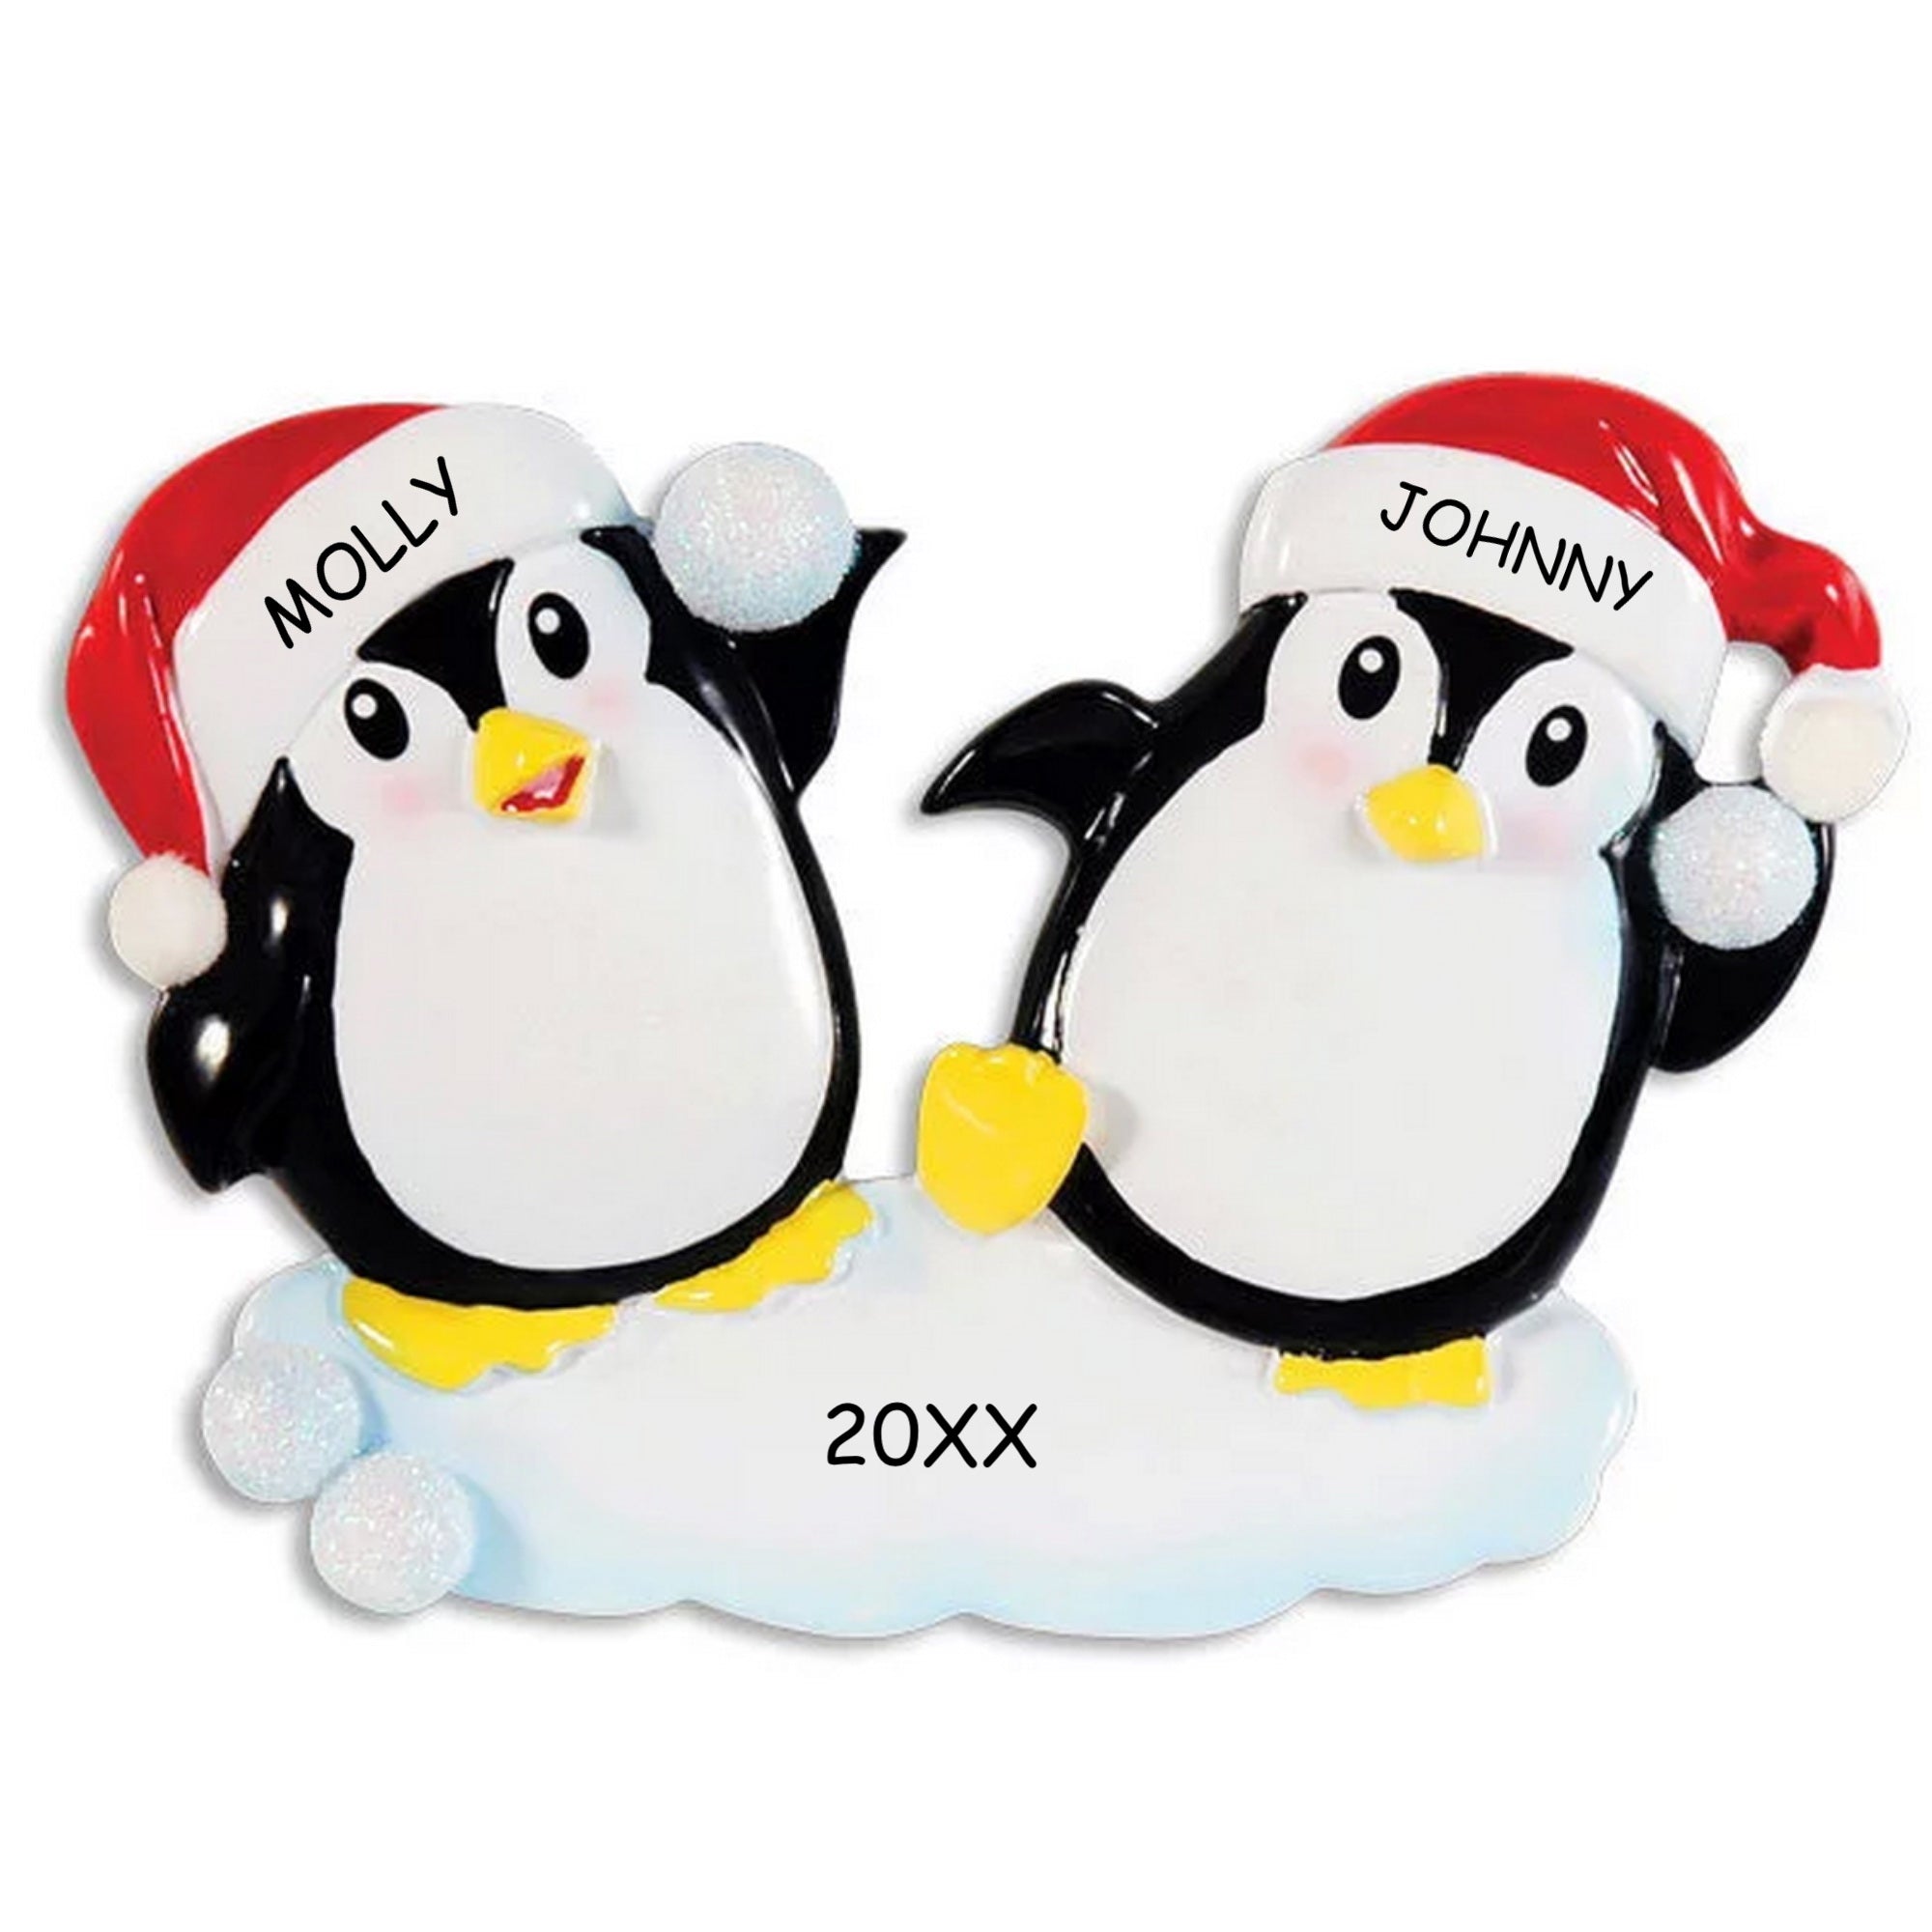 Personalized Snowballs and Penguins Couples Christmas Ornament